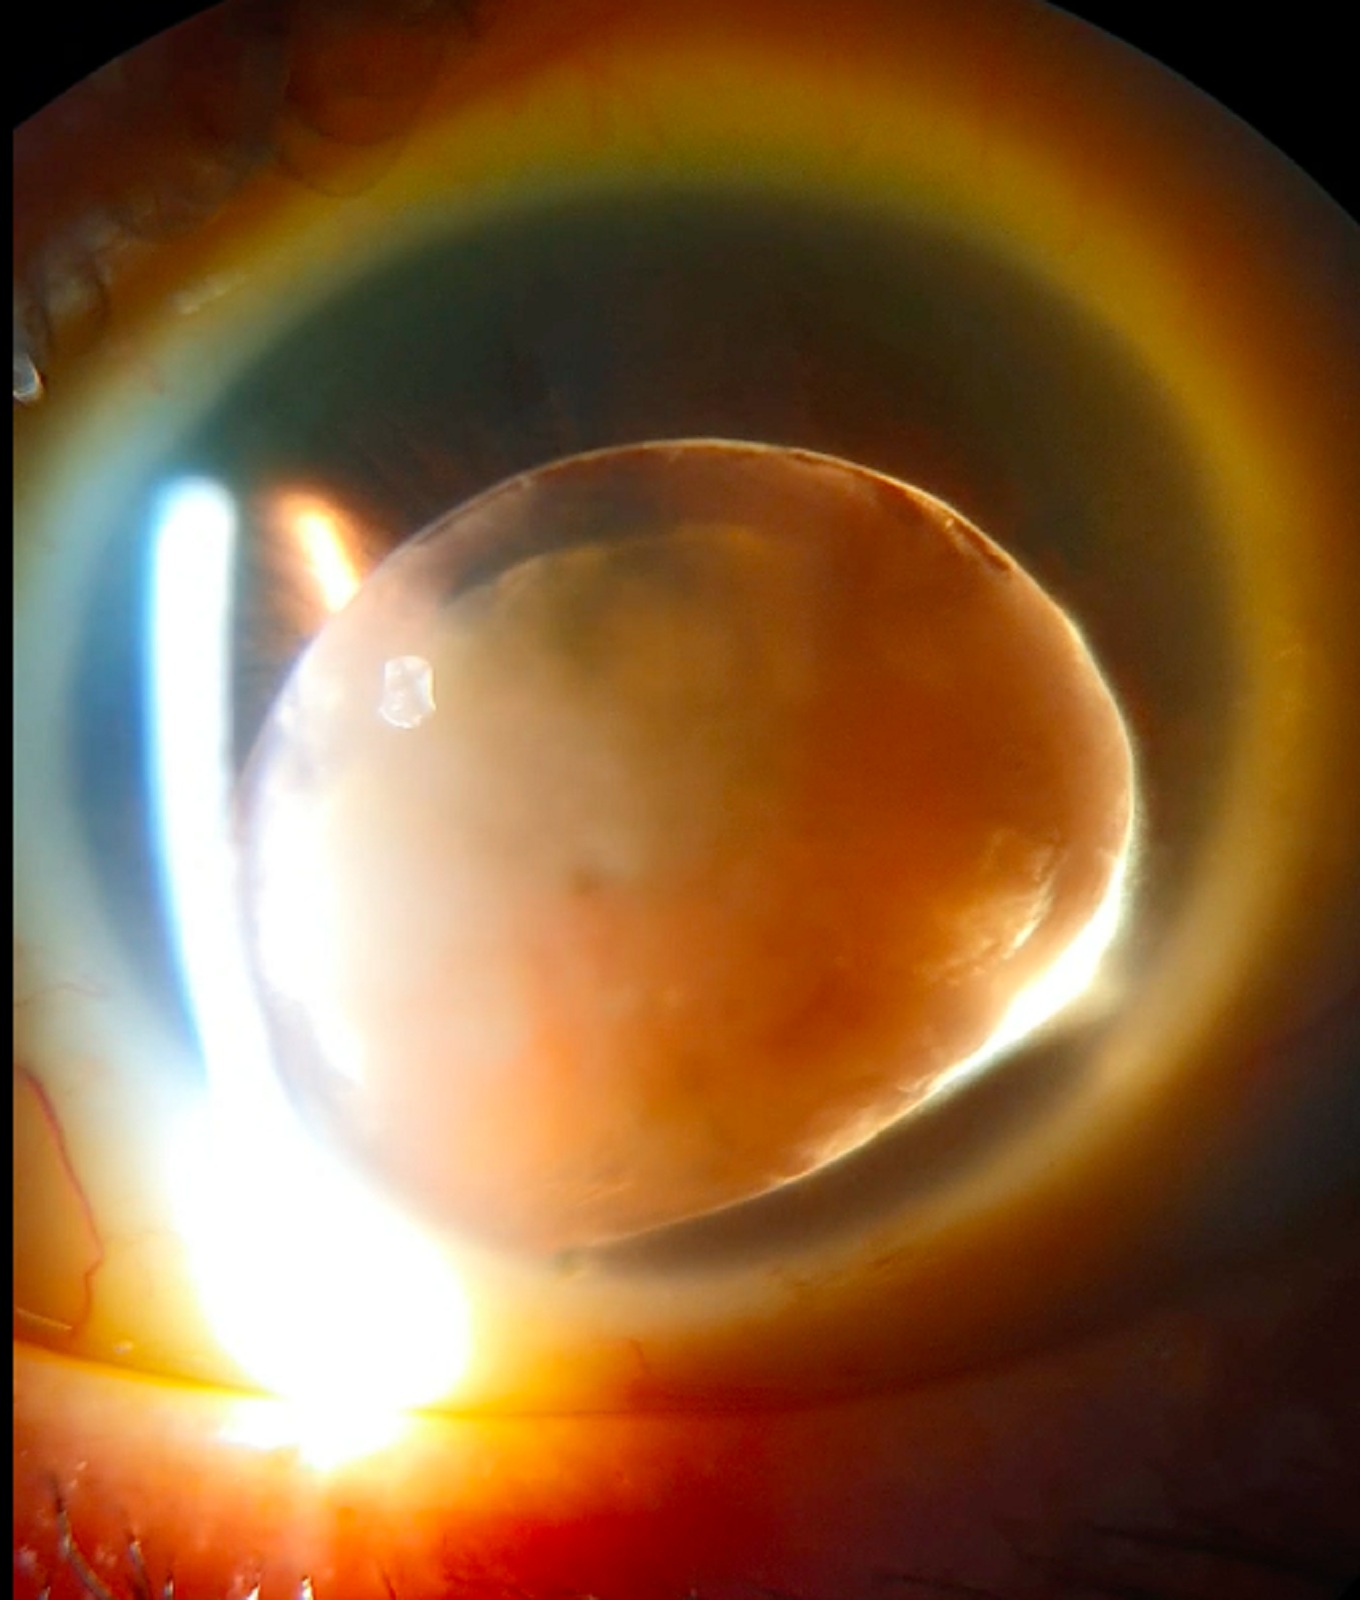 THE LENS AND ITS GOLDEN RINGS